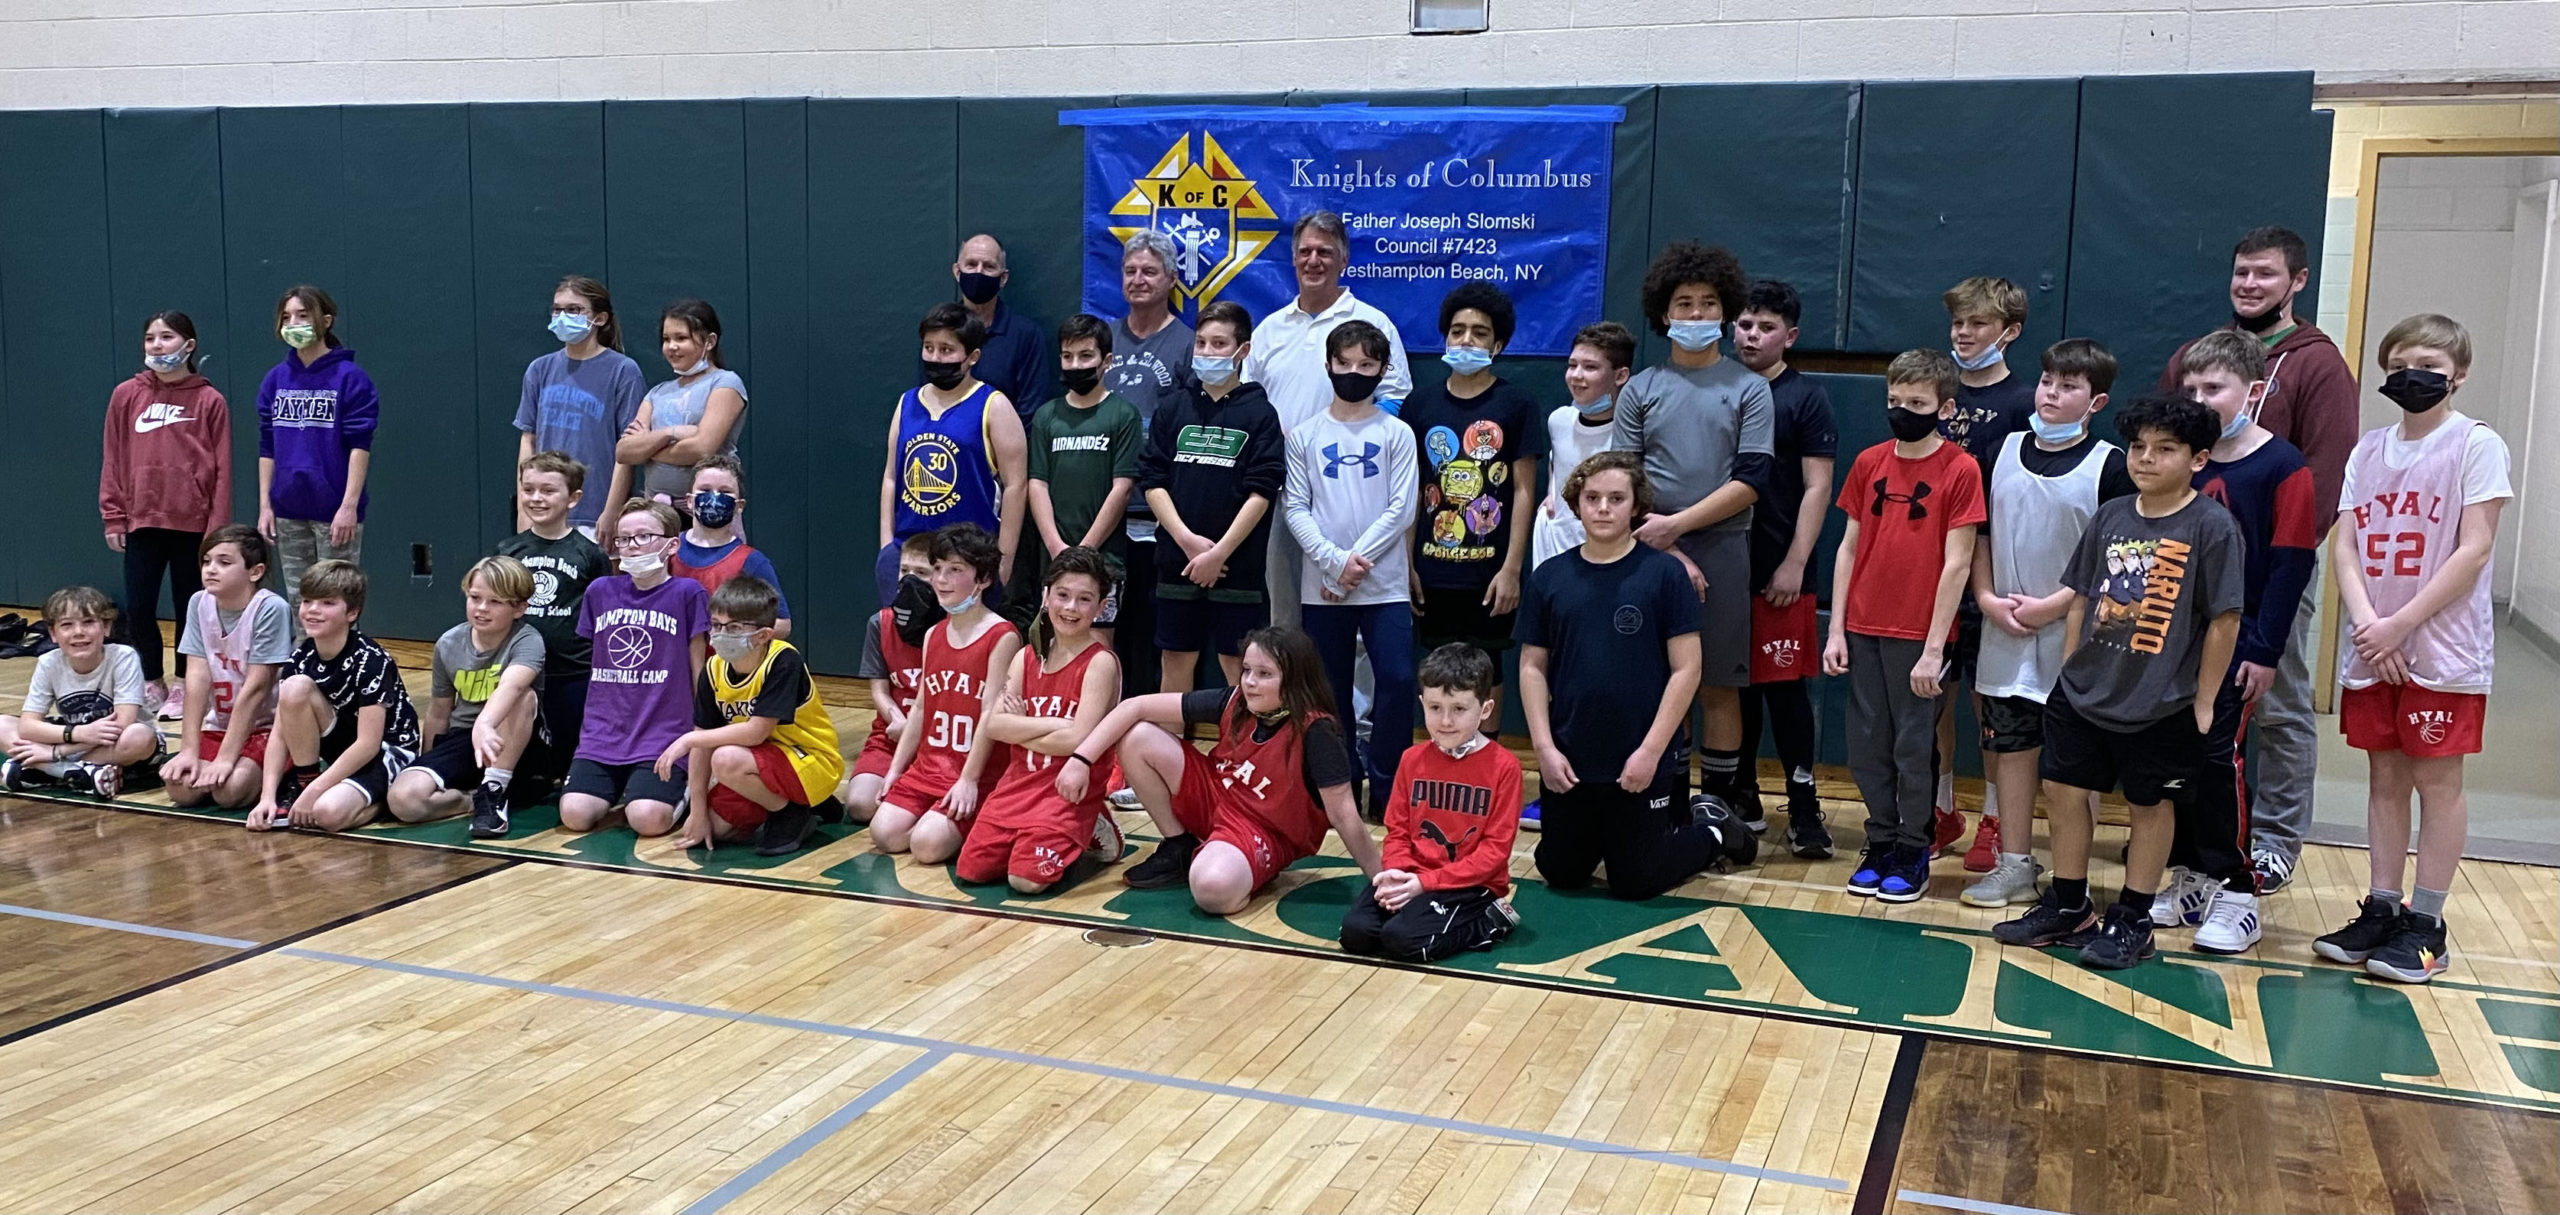 The Father Slomski Council of the Knights of Columbus held its annual Free Throw Shooting Contest on Friday at Westhampton Beach Elementary School.